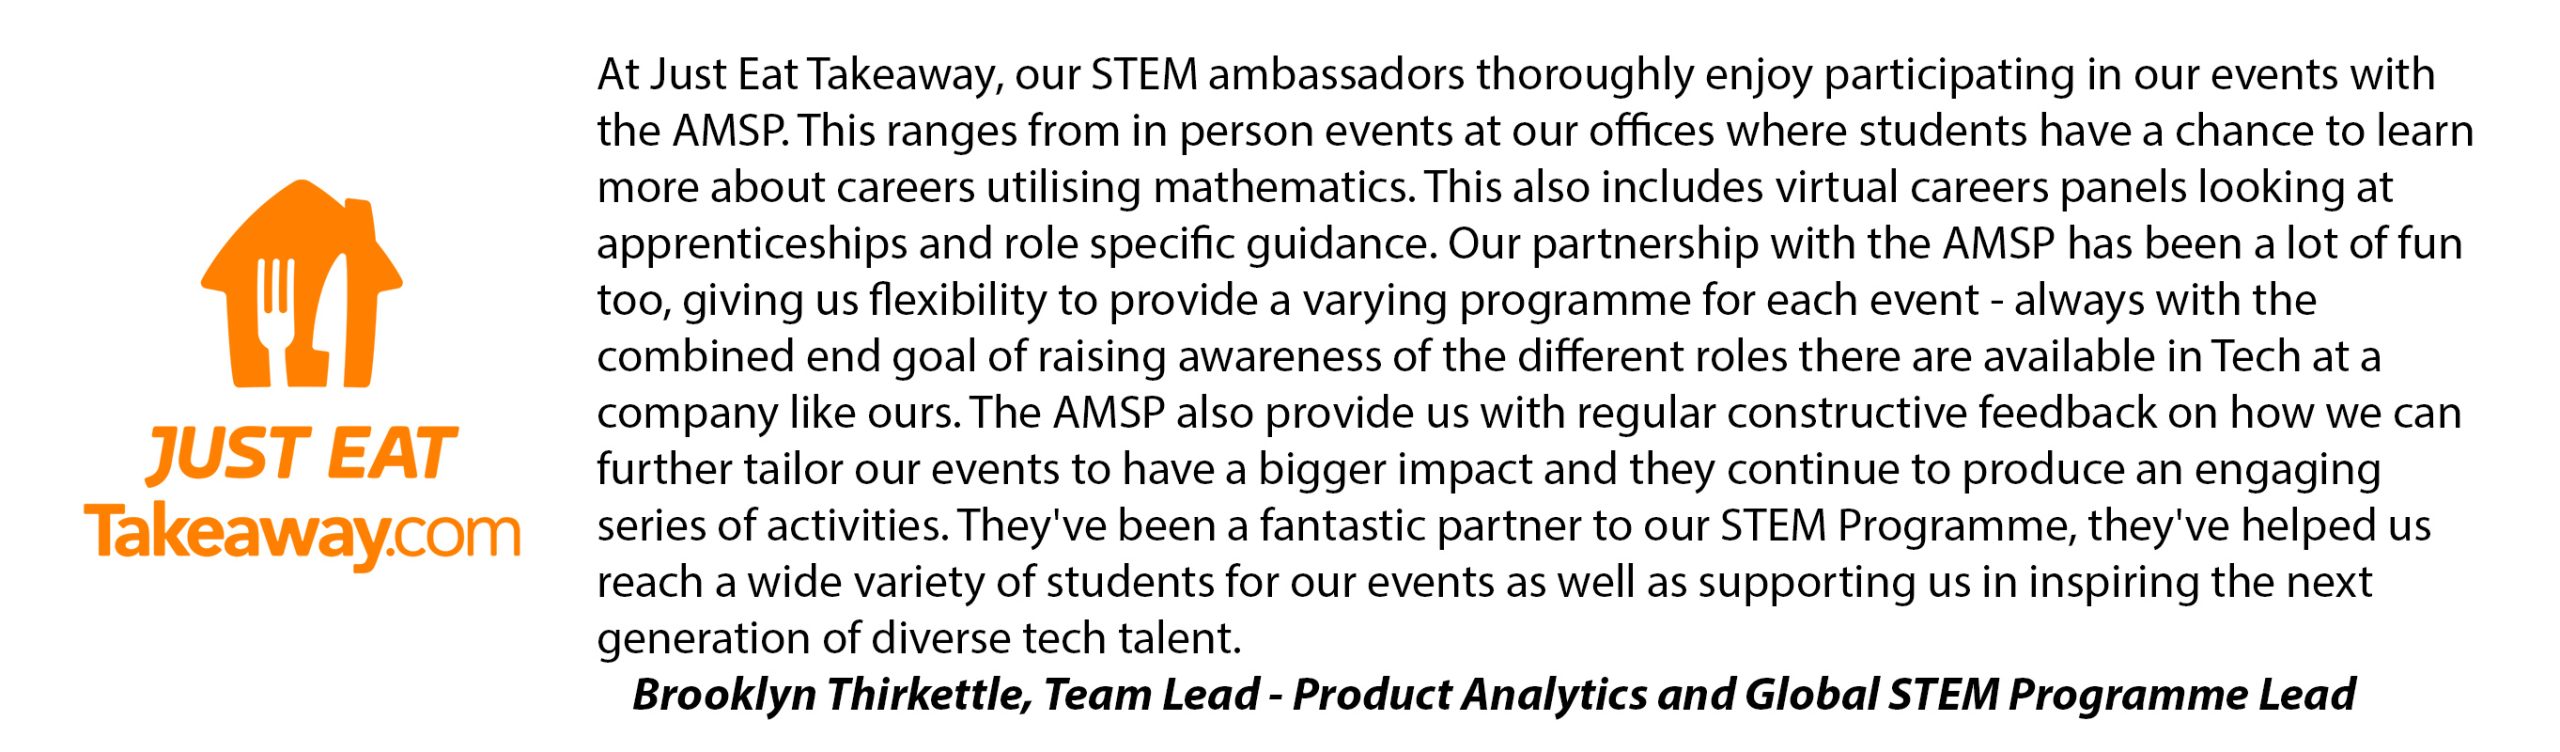 The Just Eat logo and a quote from Brooklyn Thirkettle, team lead of product analytics and global STEM programme lead